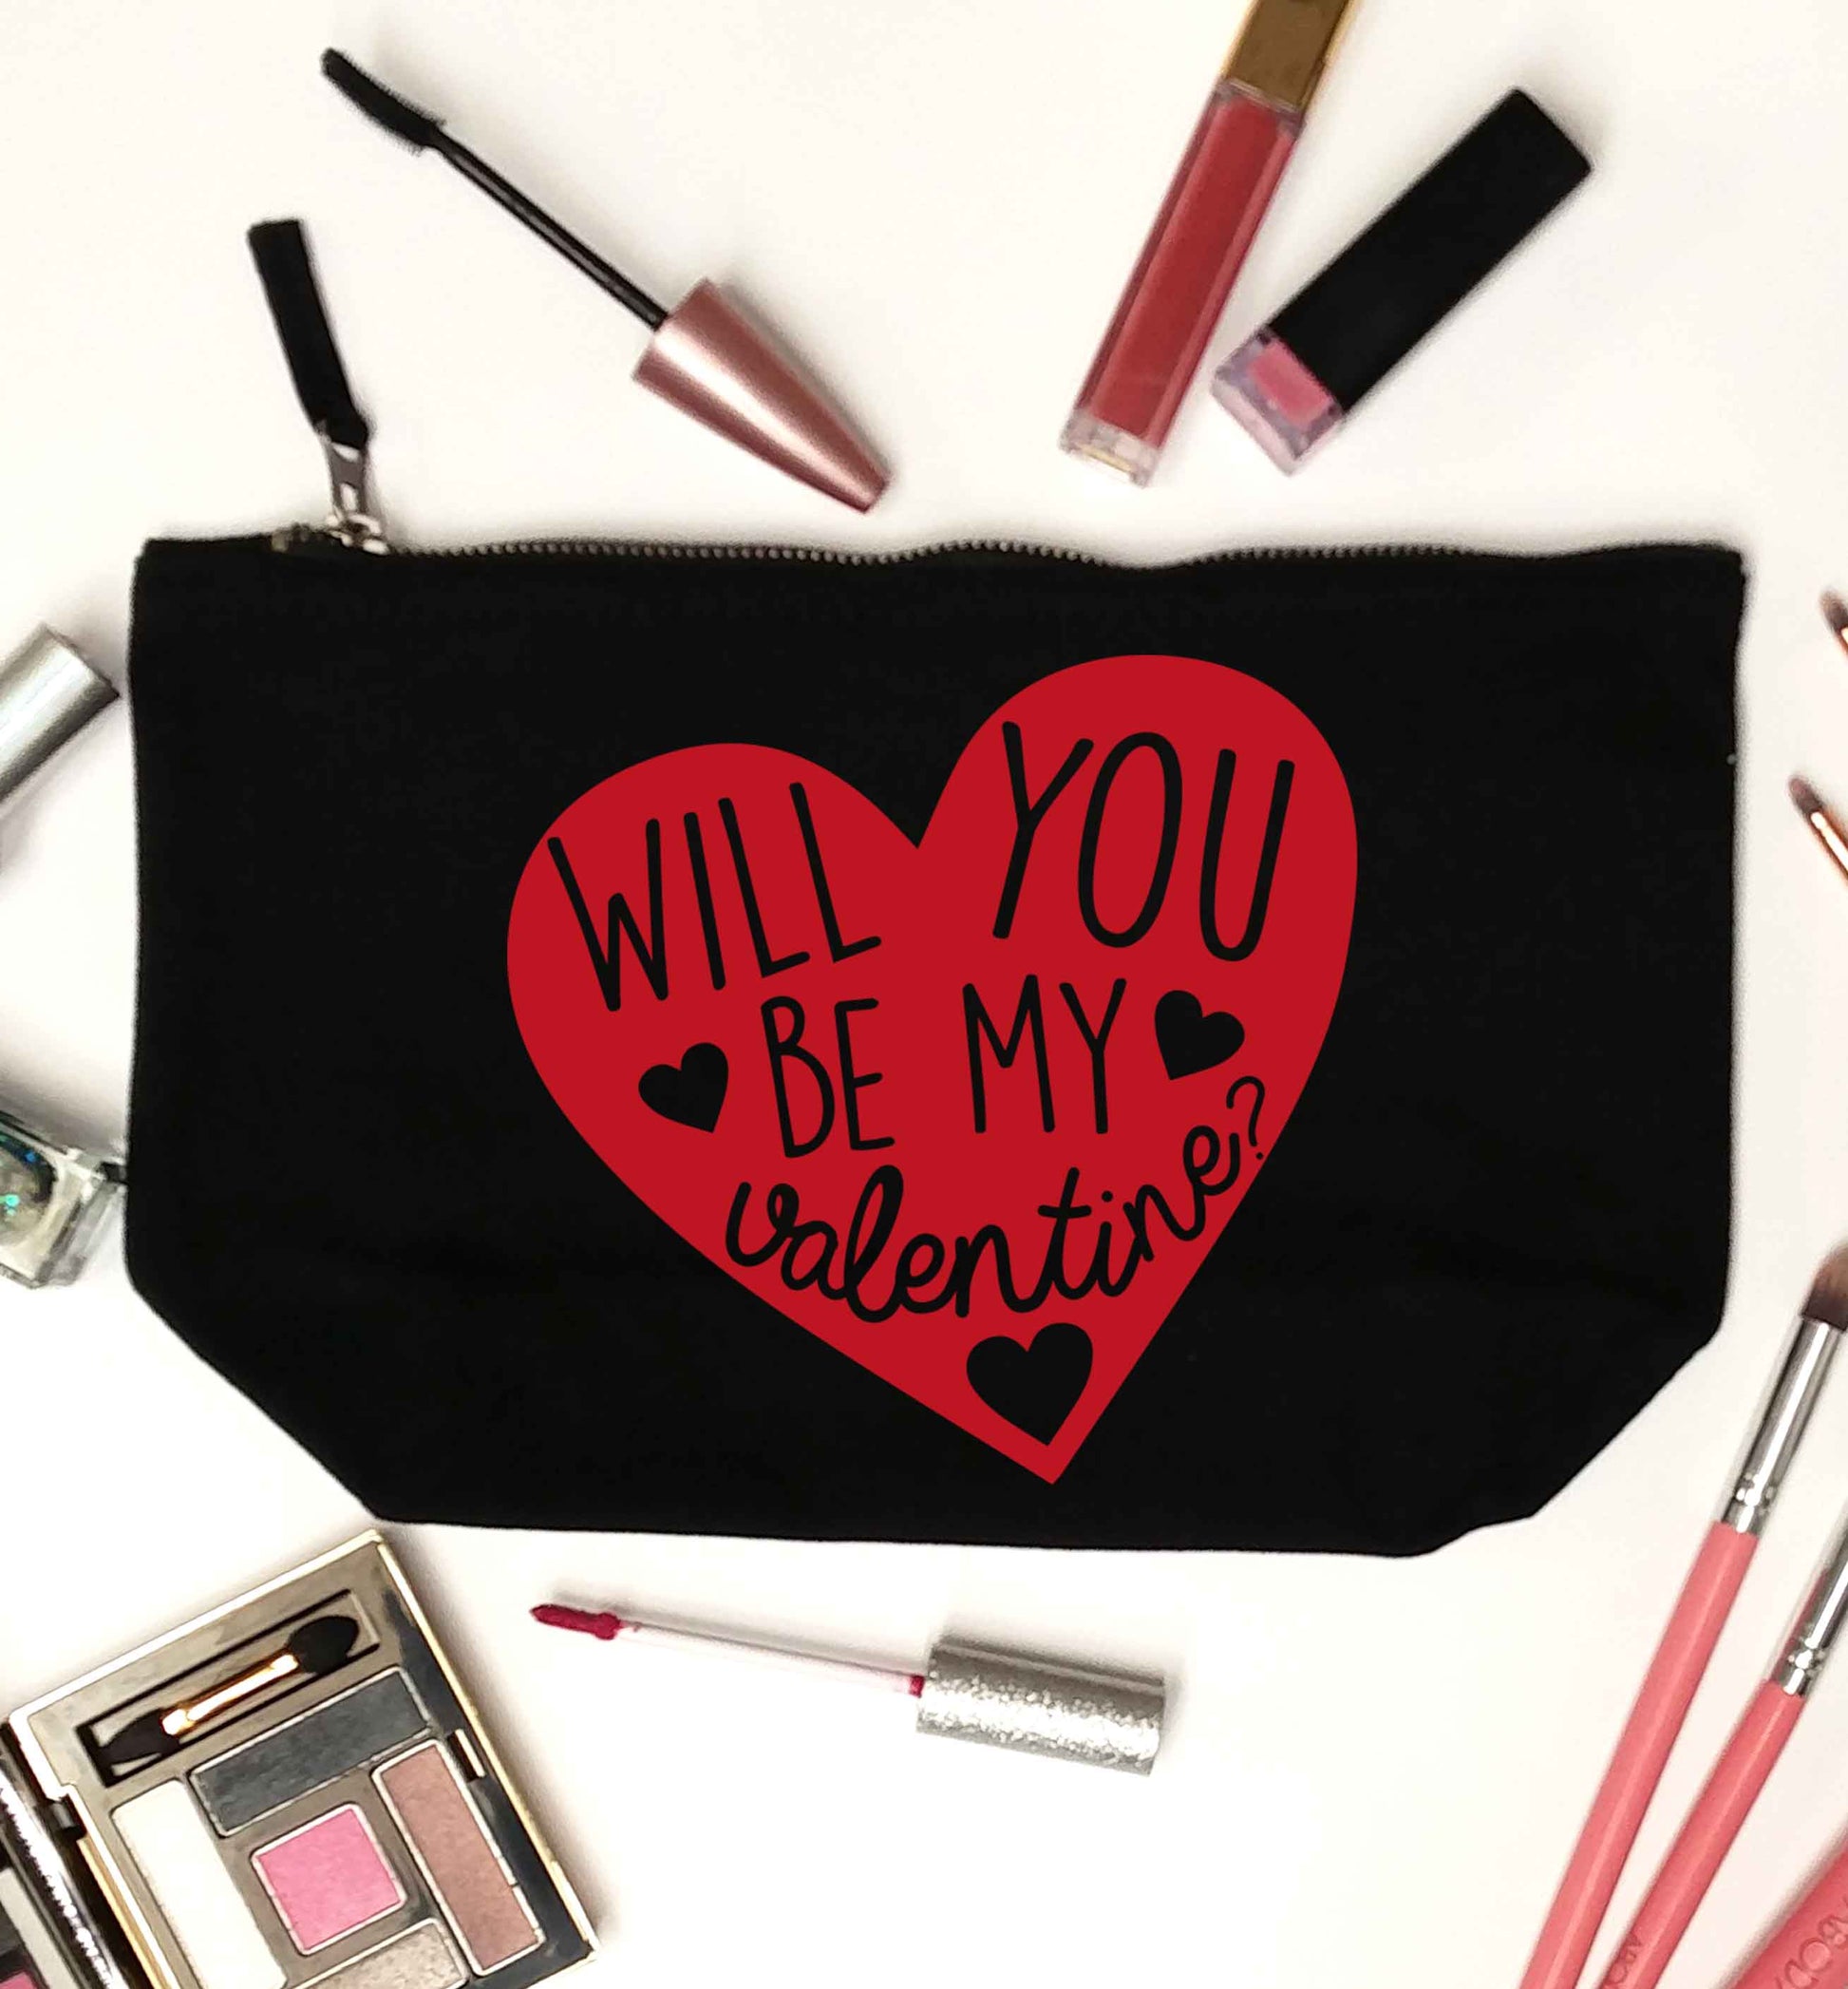 Will you be my valentine? black makeup bag